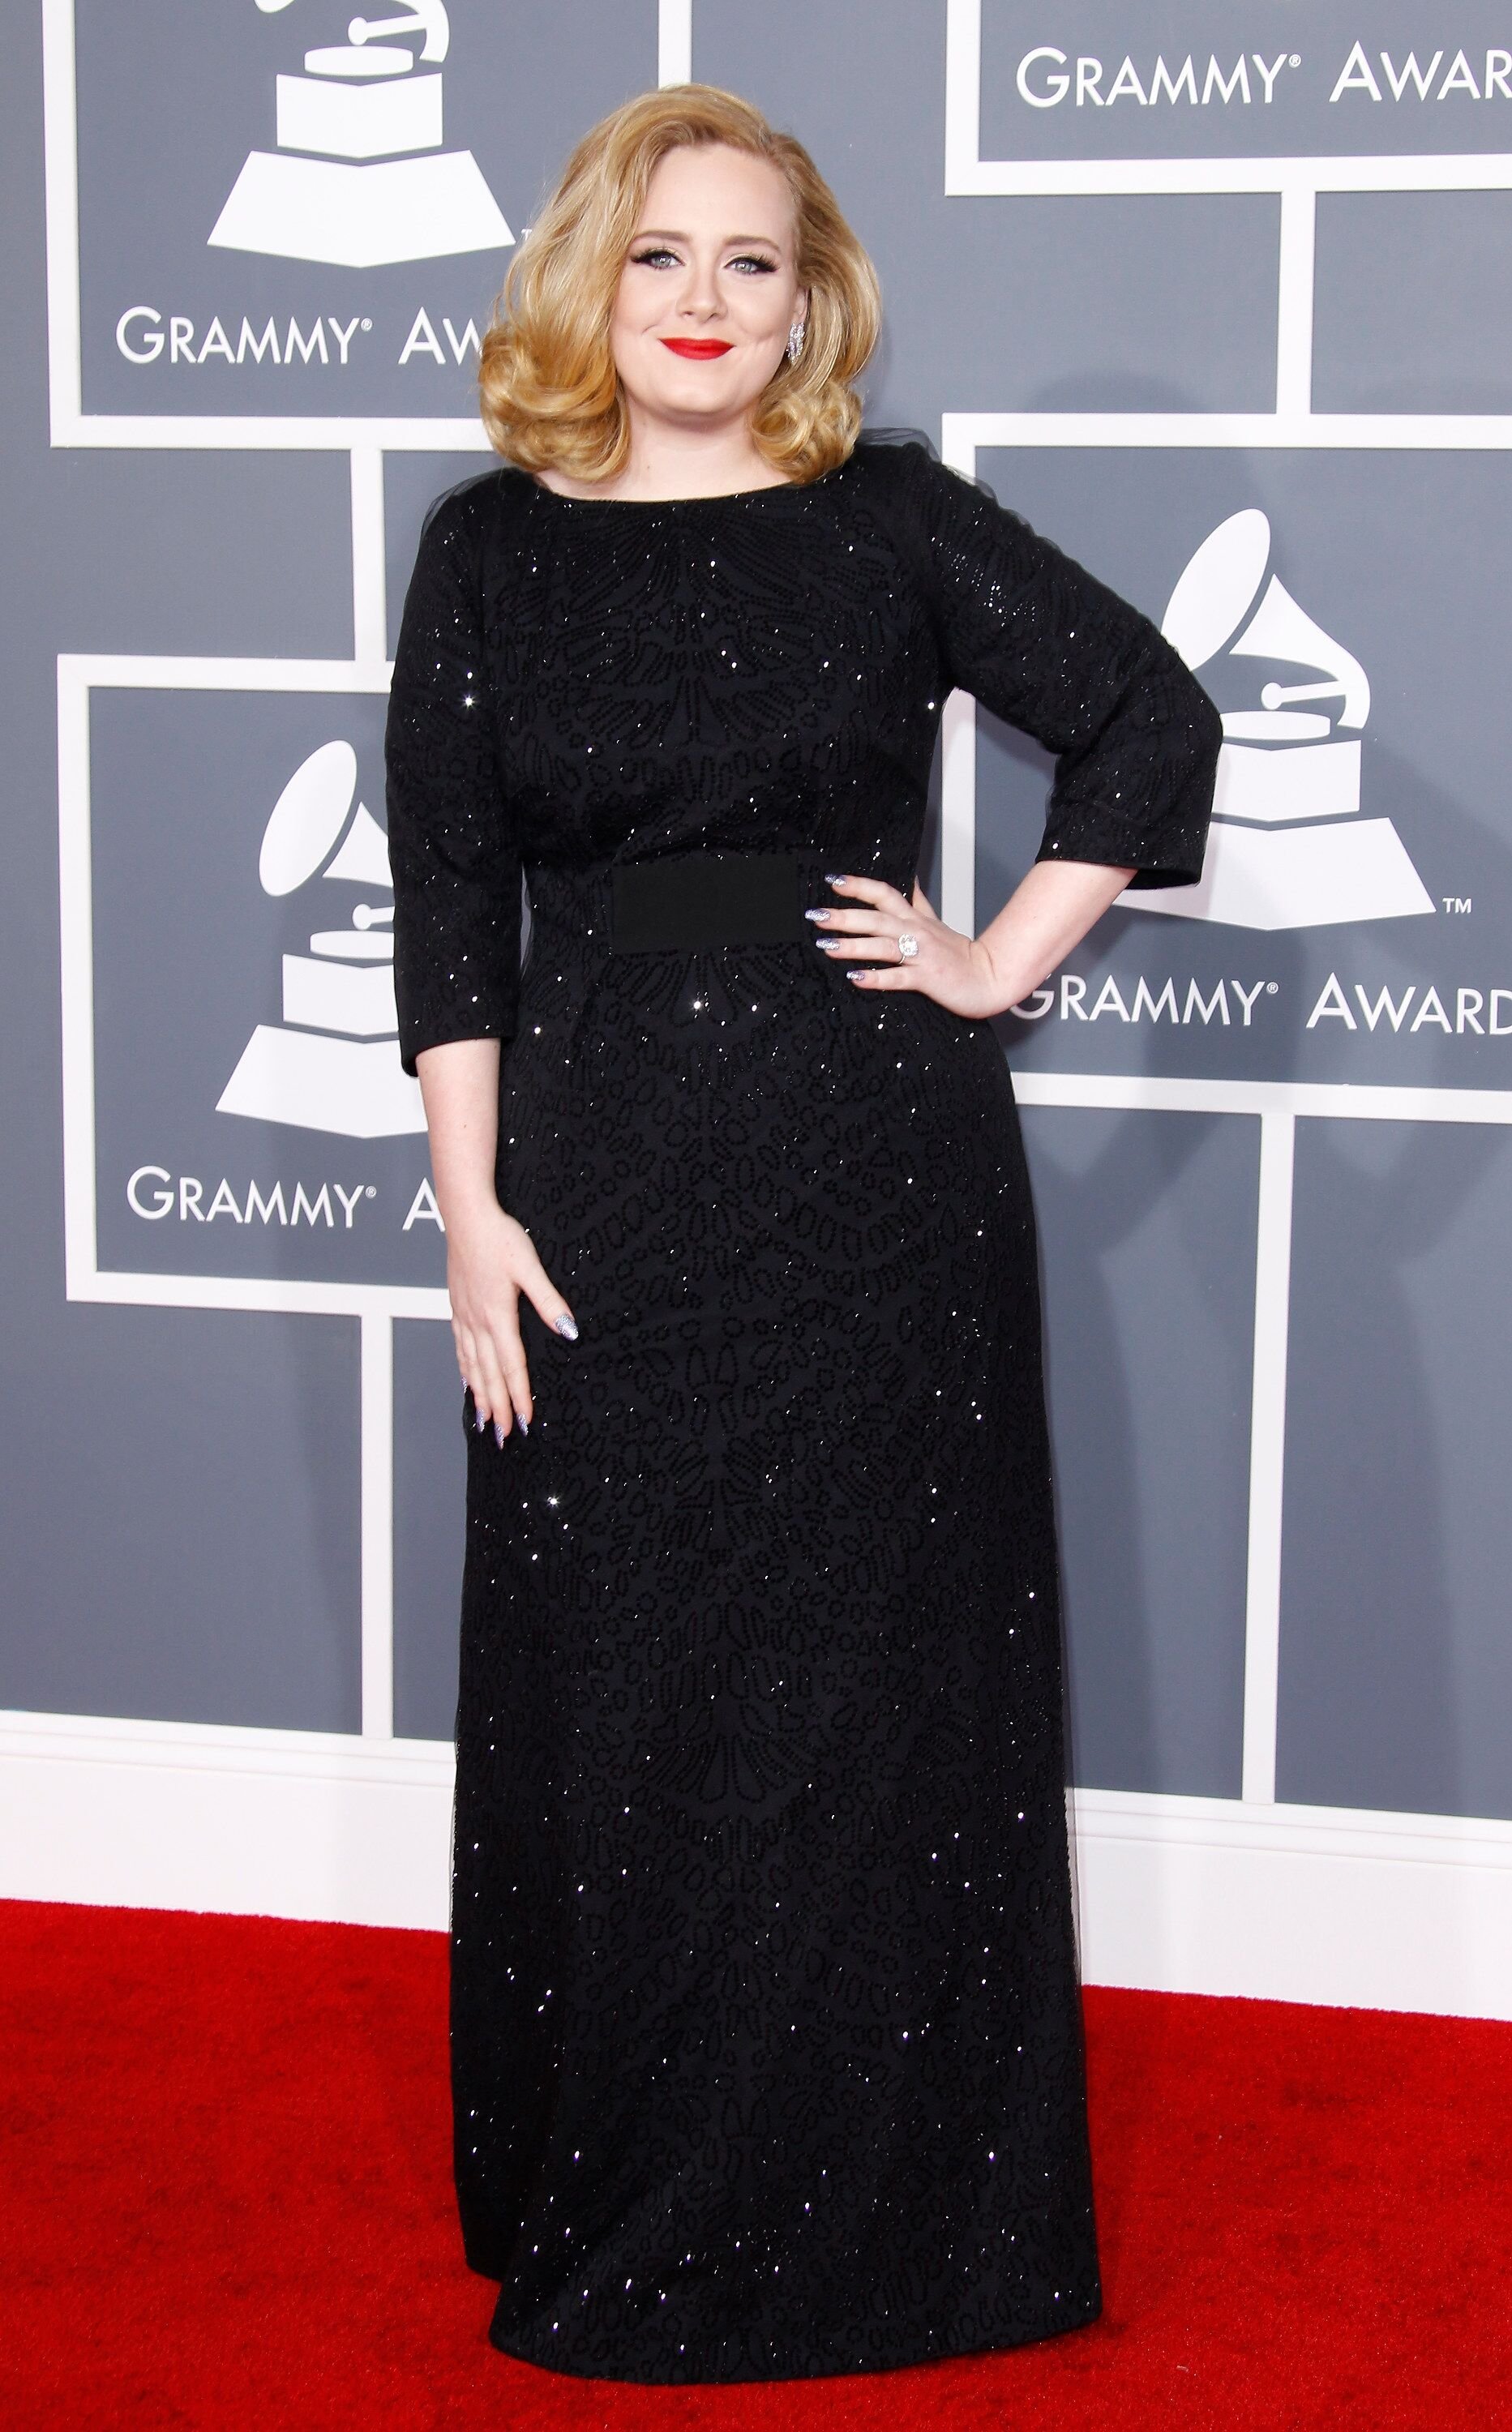 Adele arrives at the 54th Annual GRAMMY Awards held at the Staples Center on February 12, 2012 in Los Angeles, California. | Source: Getty Images